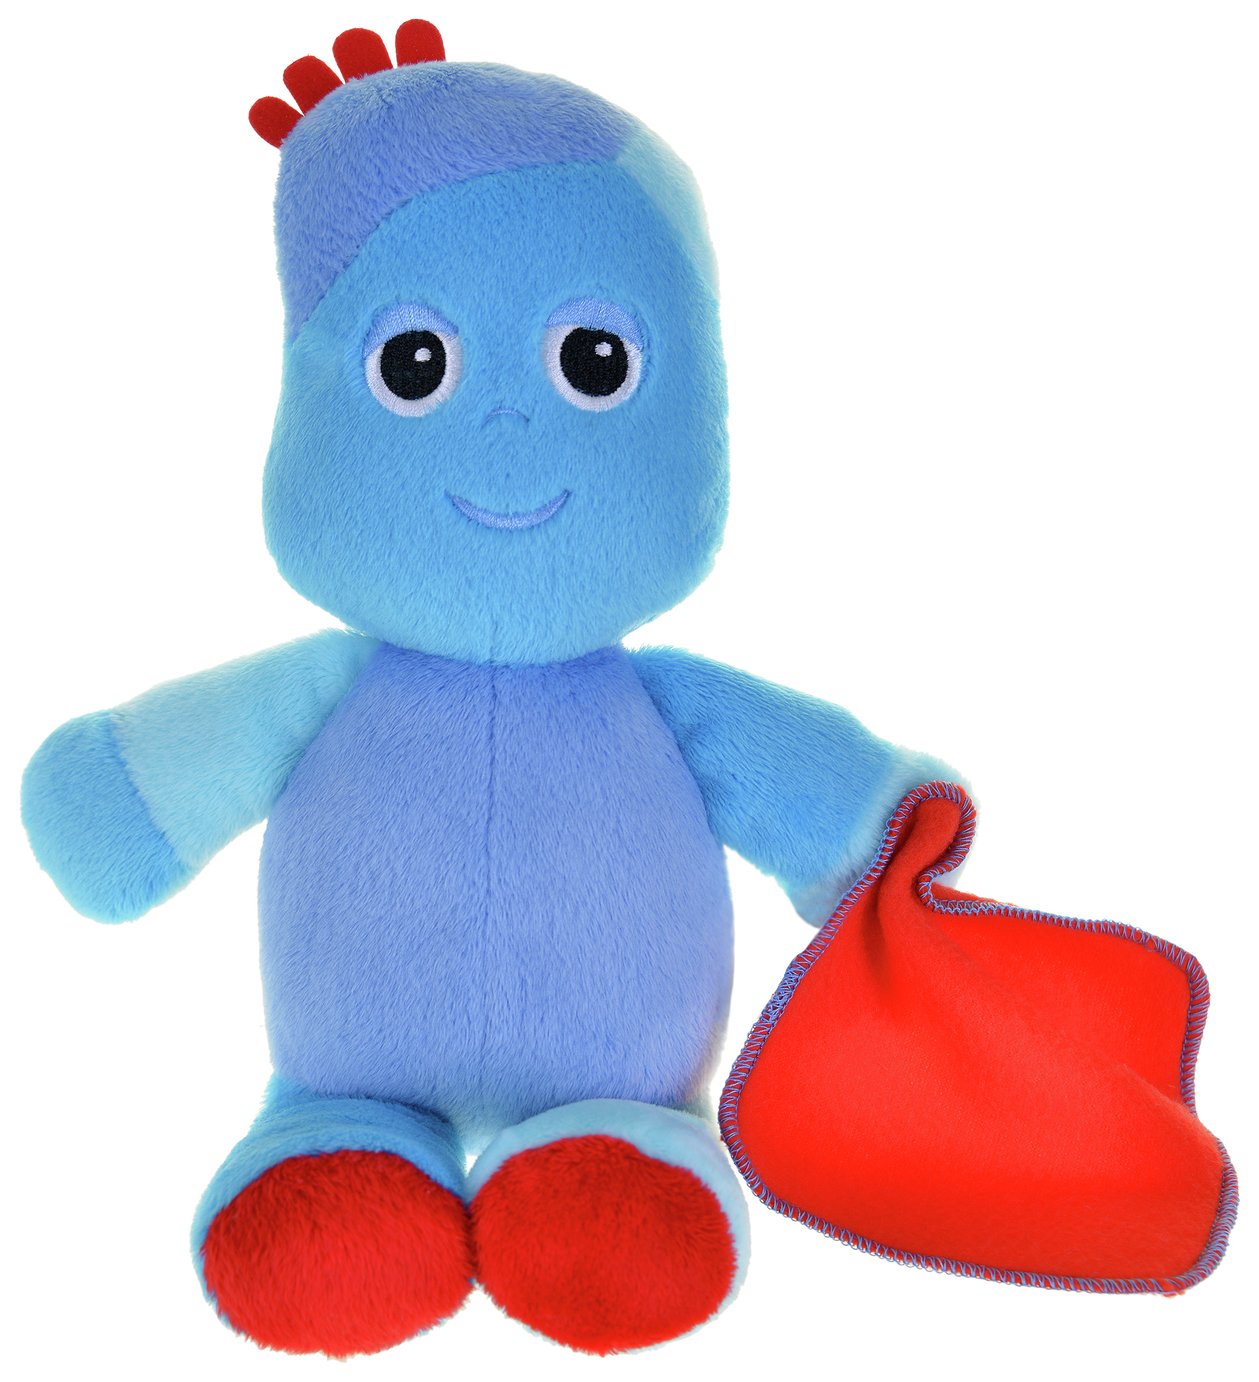 In The Night Garden Large Talking Iggle Piggle Soft Toy review